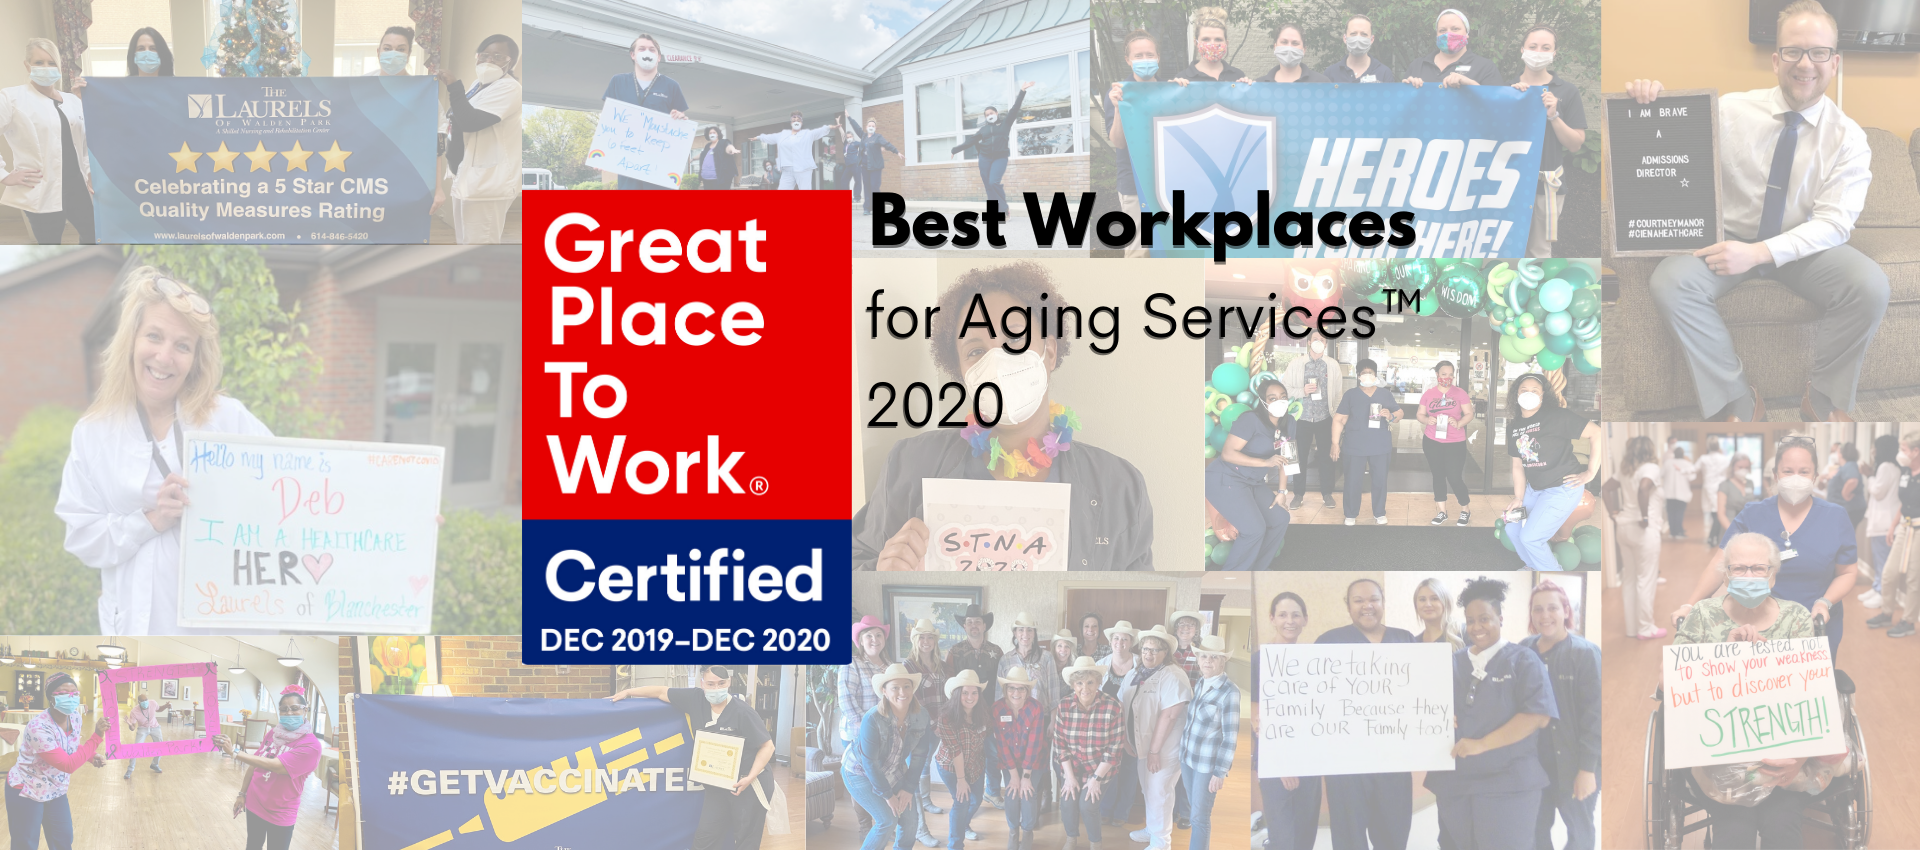 Laurels - A great place to work banner